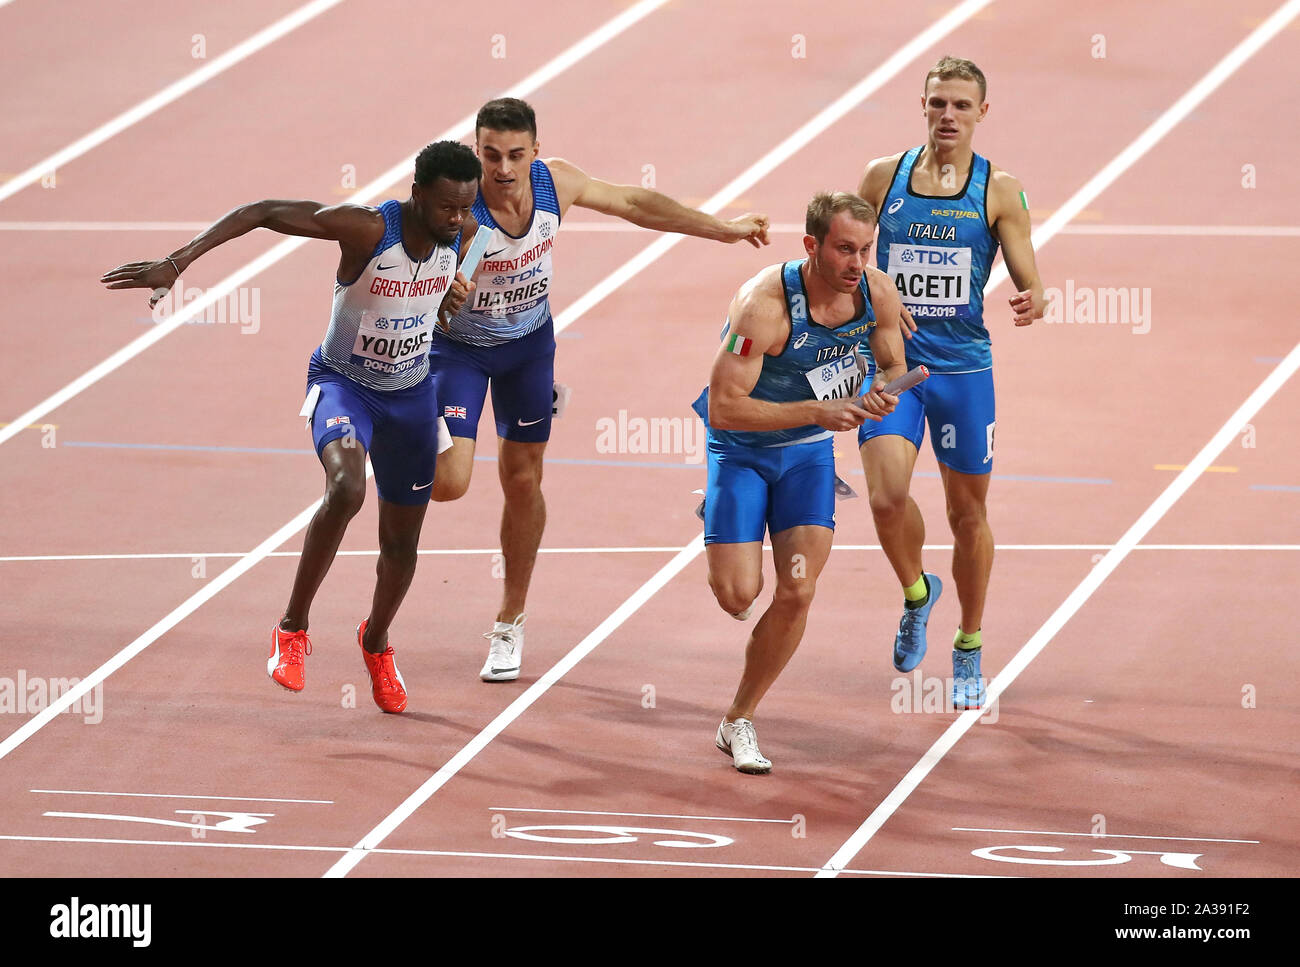 Great Britain's Rabah Yousif (left) and Toby Harries drop the baton during their changeover in the Men's 4x400m Relay Final during day ten of the IAAF World Championships at The Khalifa International Stadium, Doha, Qatar. Stock Photo